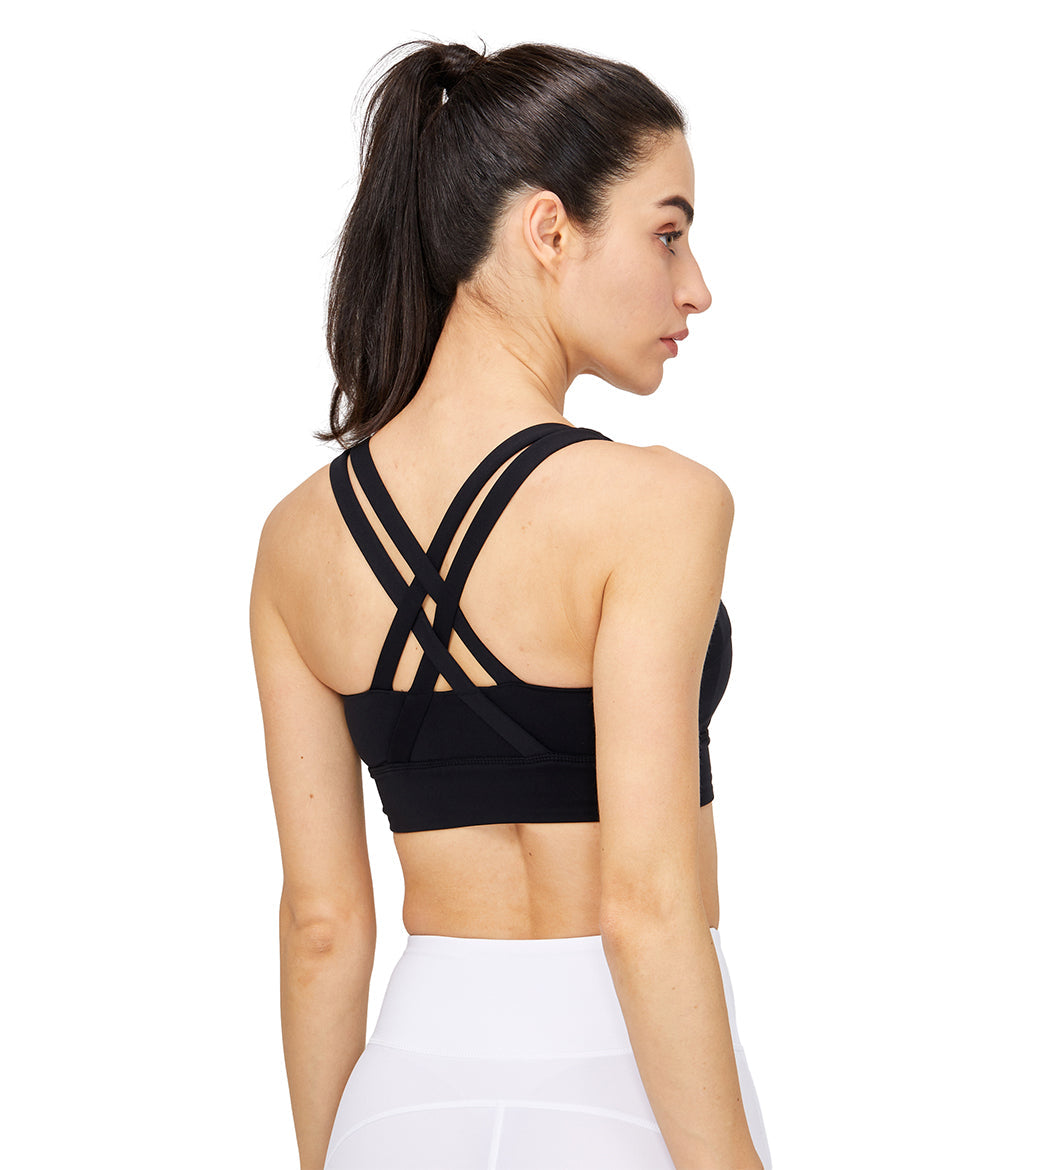 LOVESOFT Women's Strappy Sports Bra Crossover Backlit Support Yoga Bra with Removable Cups